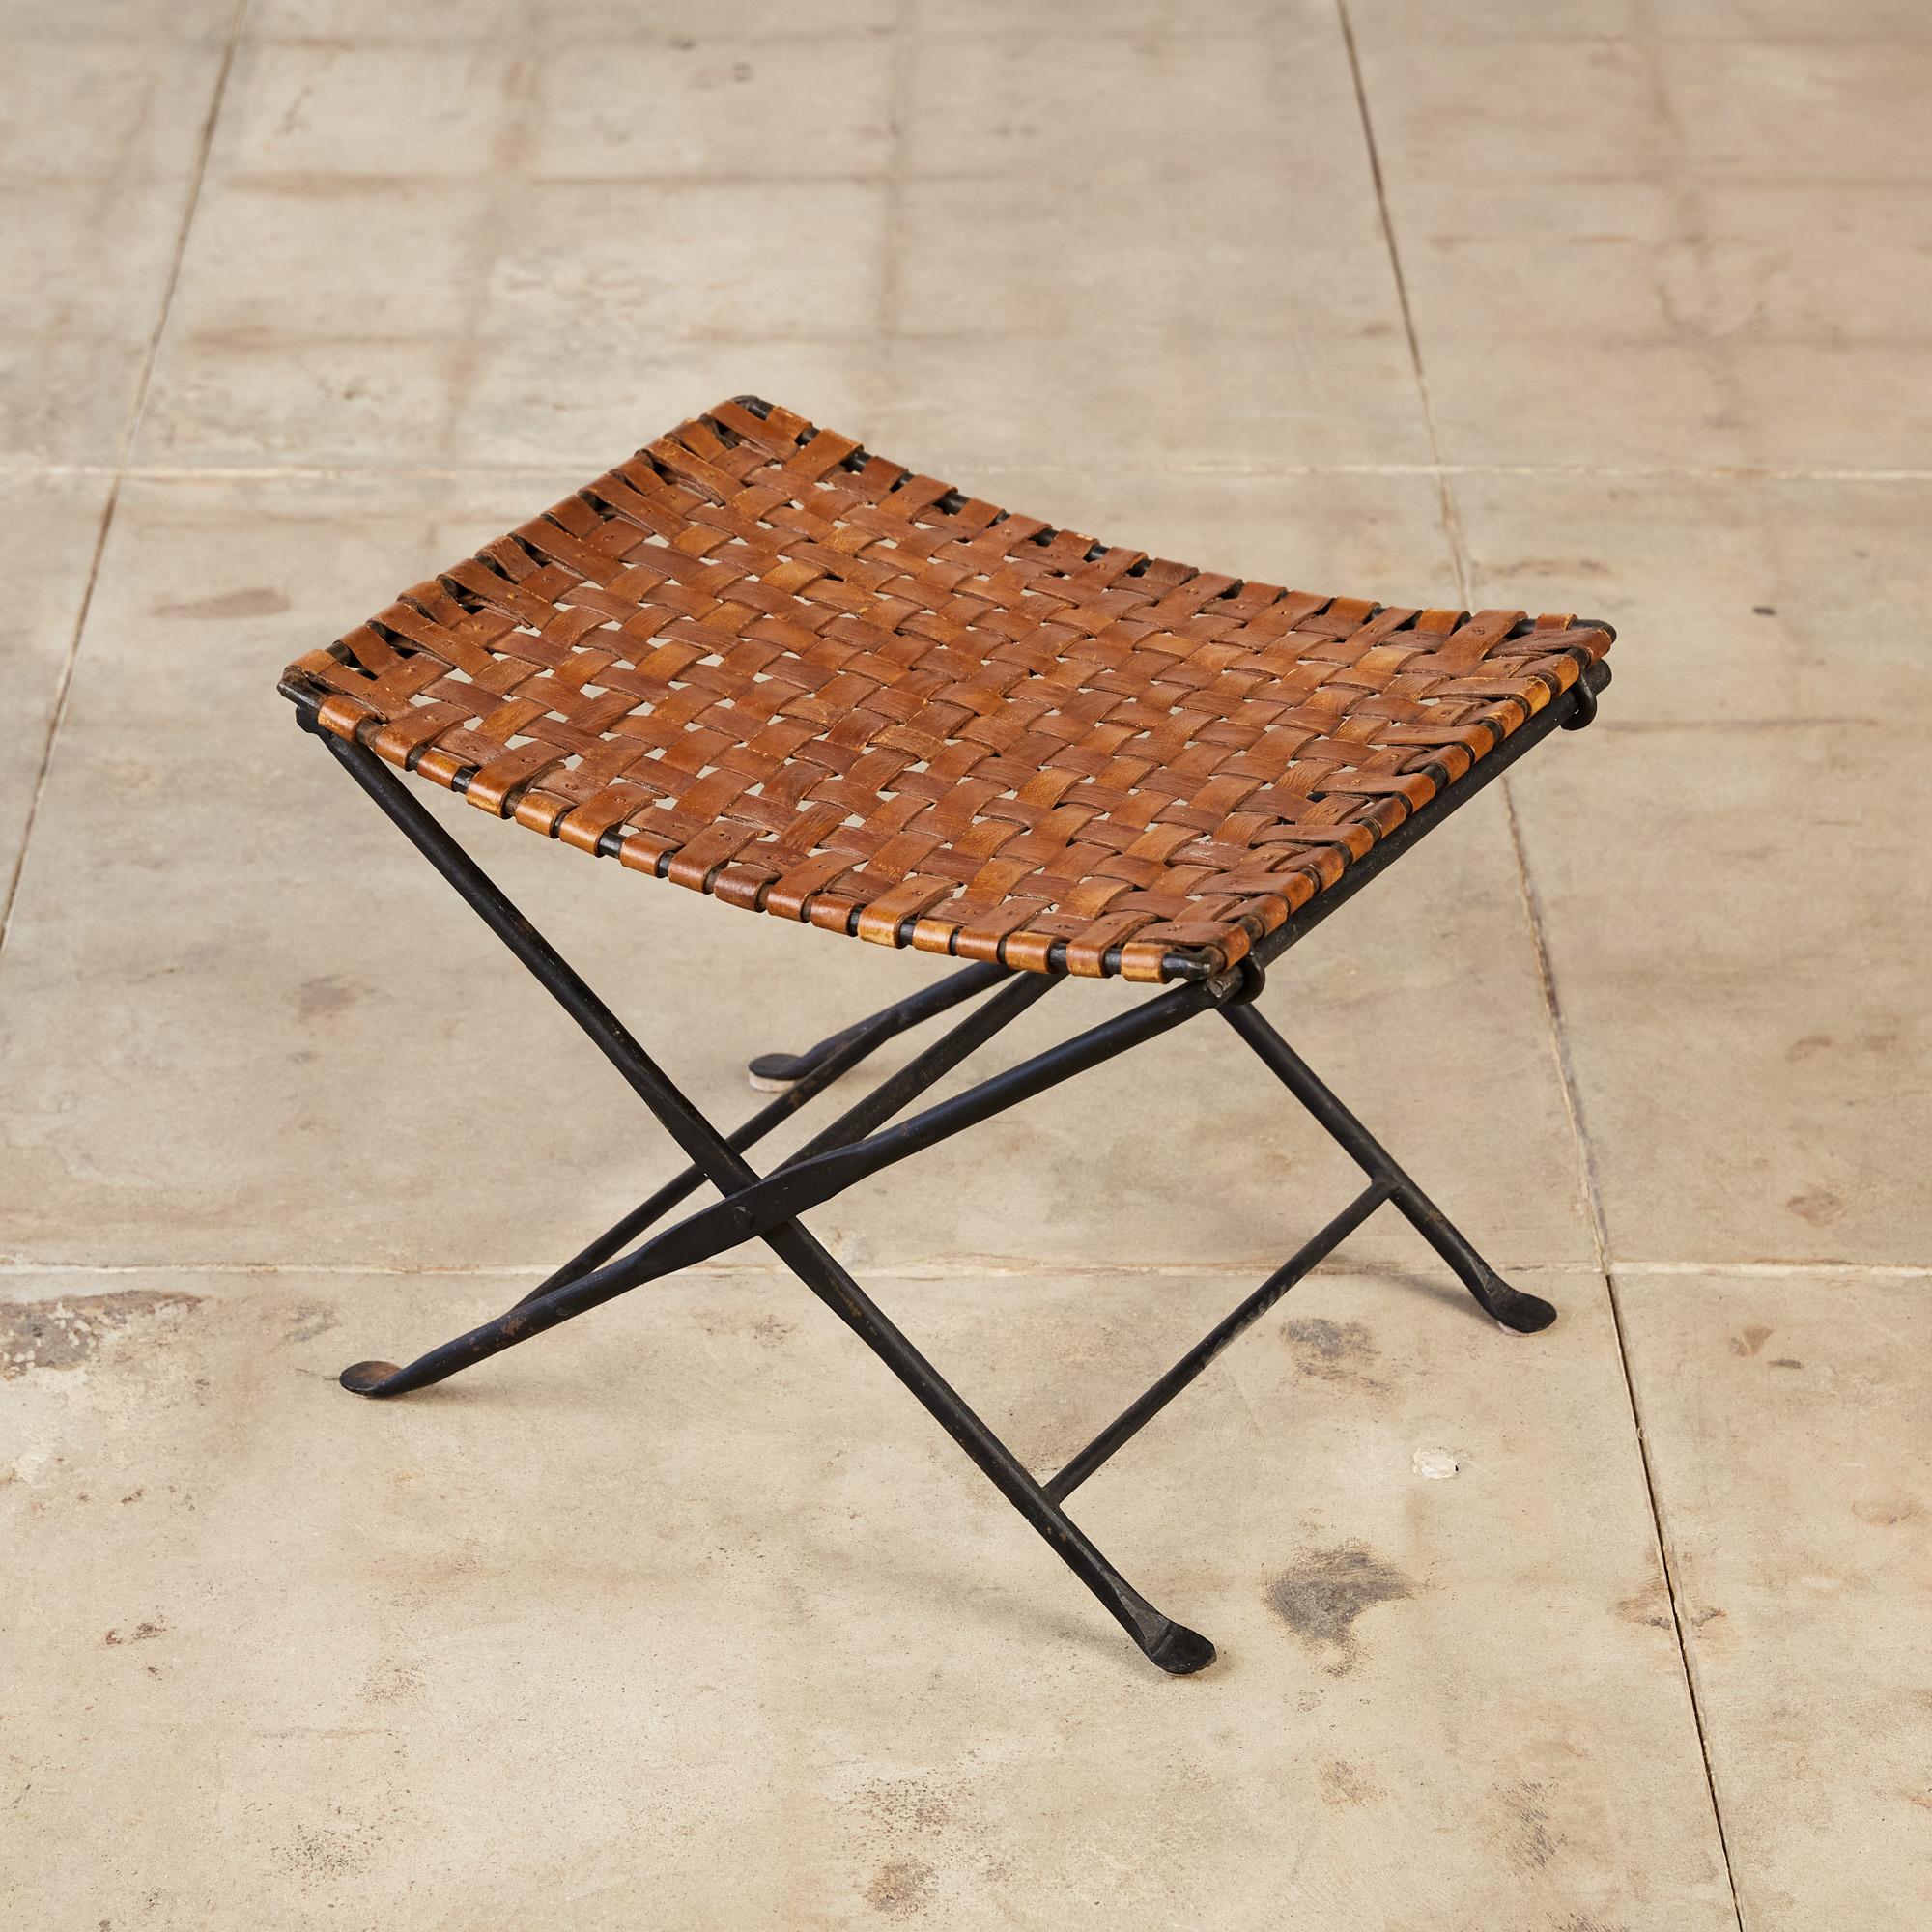 The stool features a folding wrought iron base with x-frame profiles with hammered metal details. The seat is composed of brown leather in a plain weave. The leather straps wrap around the metal frame showing off simplistic but fine